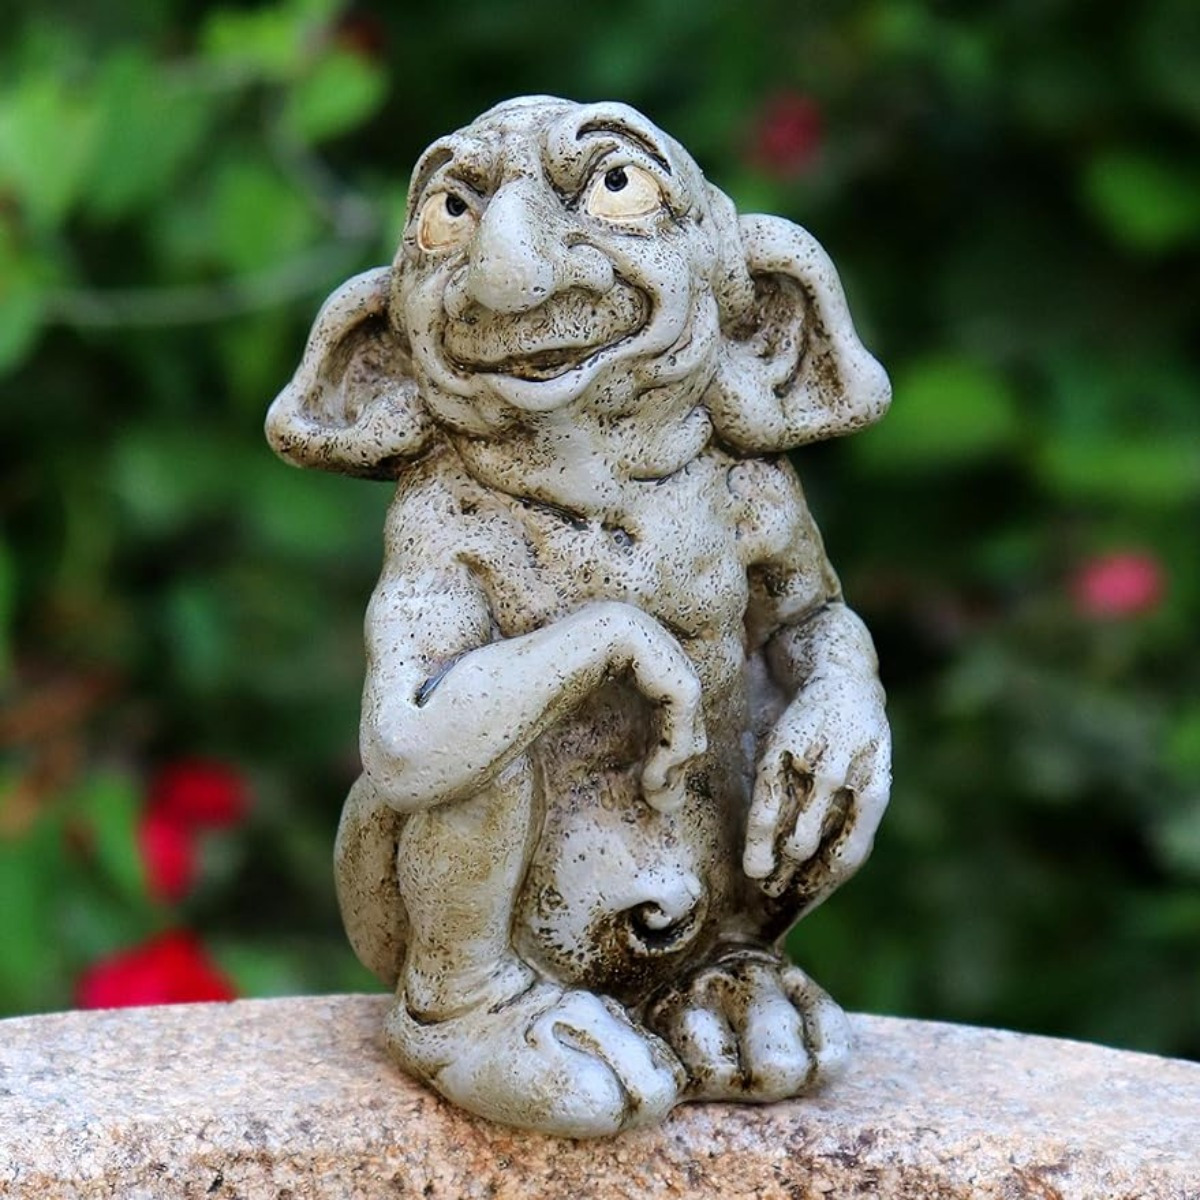 

1pc, Gargoyle Resin Statue, Classic Gothic Garden Decor, Durable Resin Crafted Troll Figure, Unique Home & Outdoor Ornament